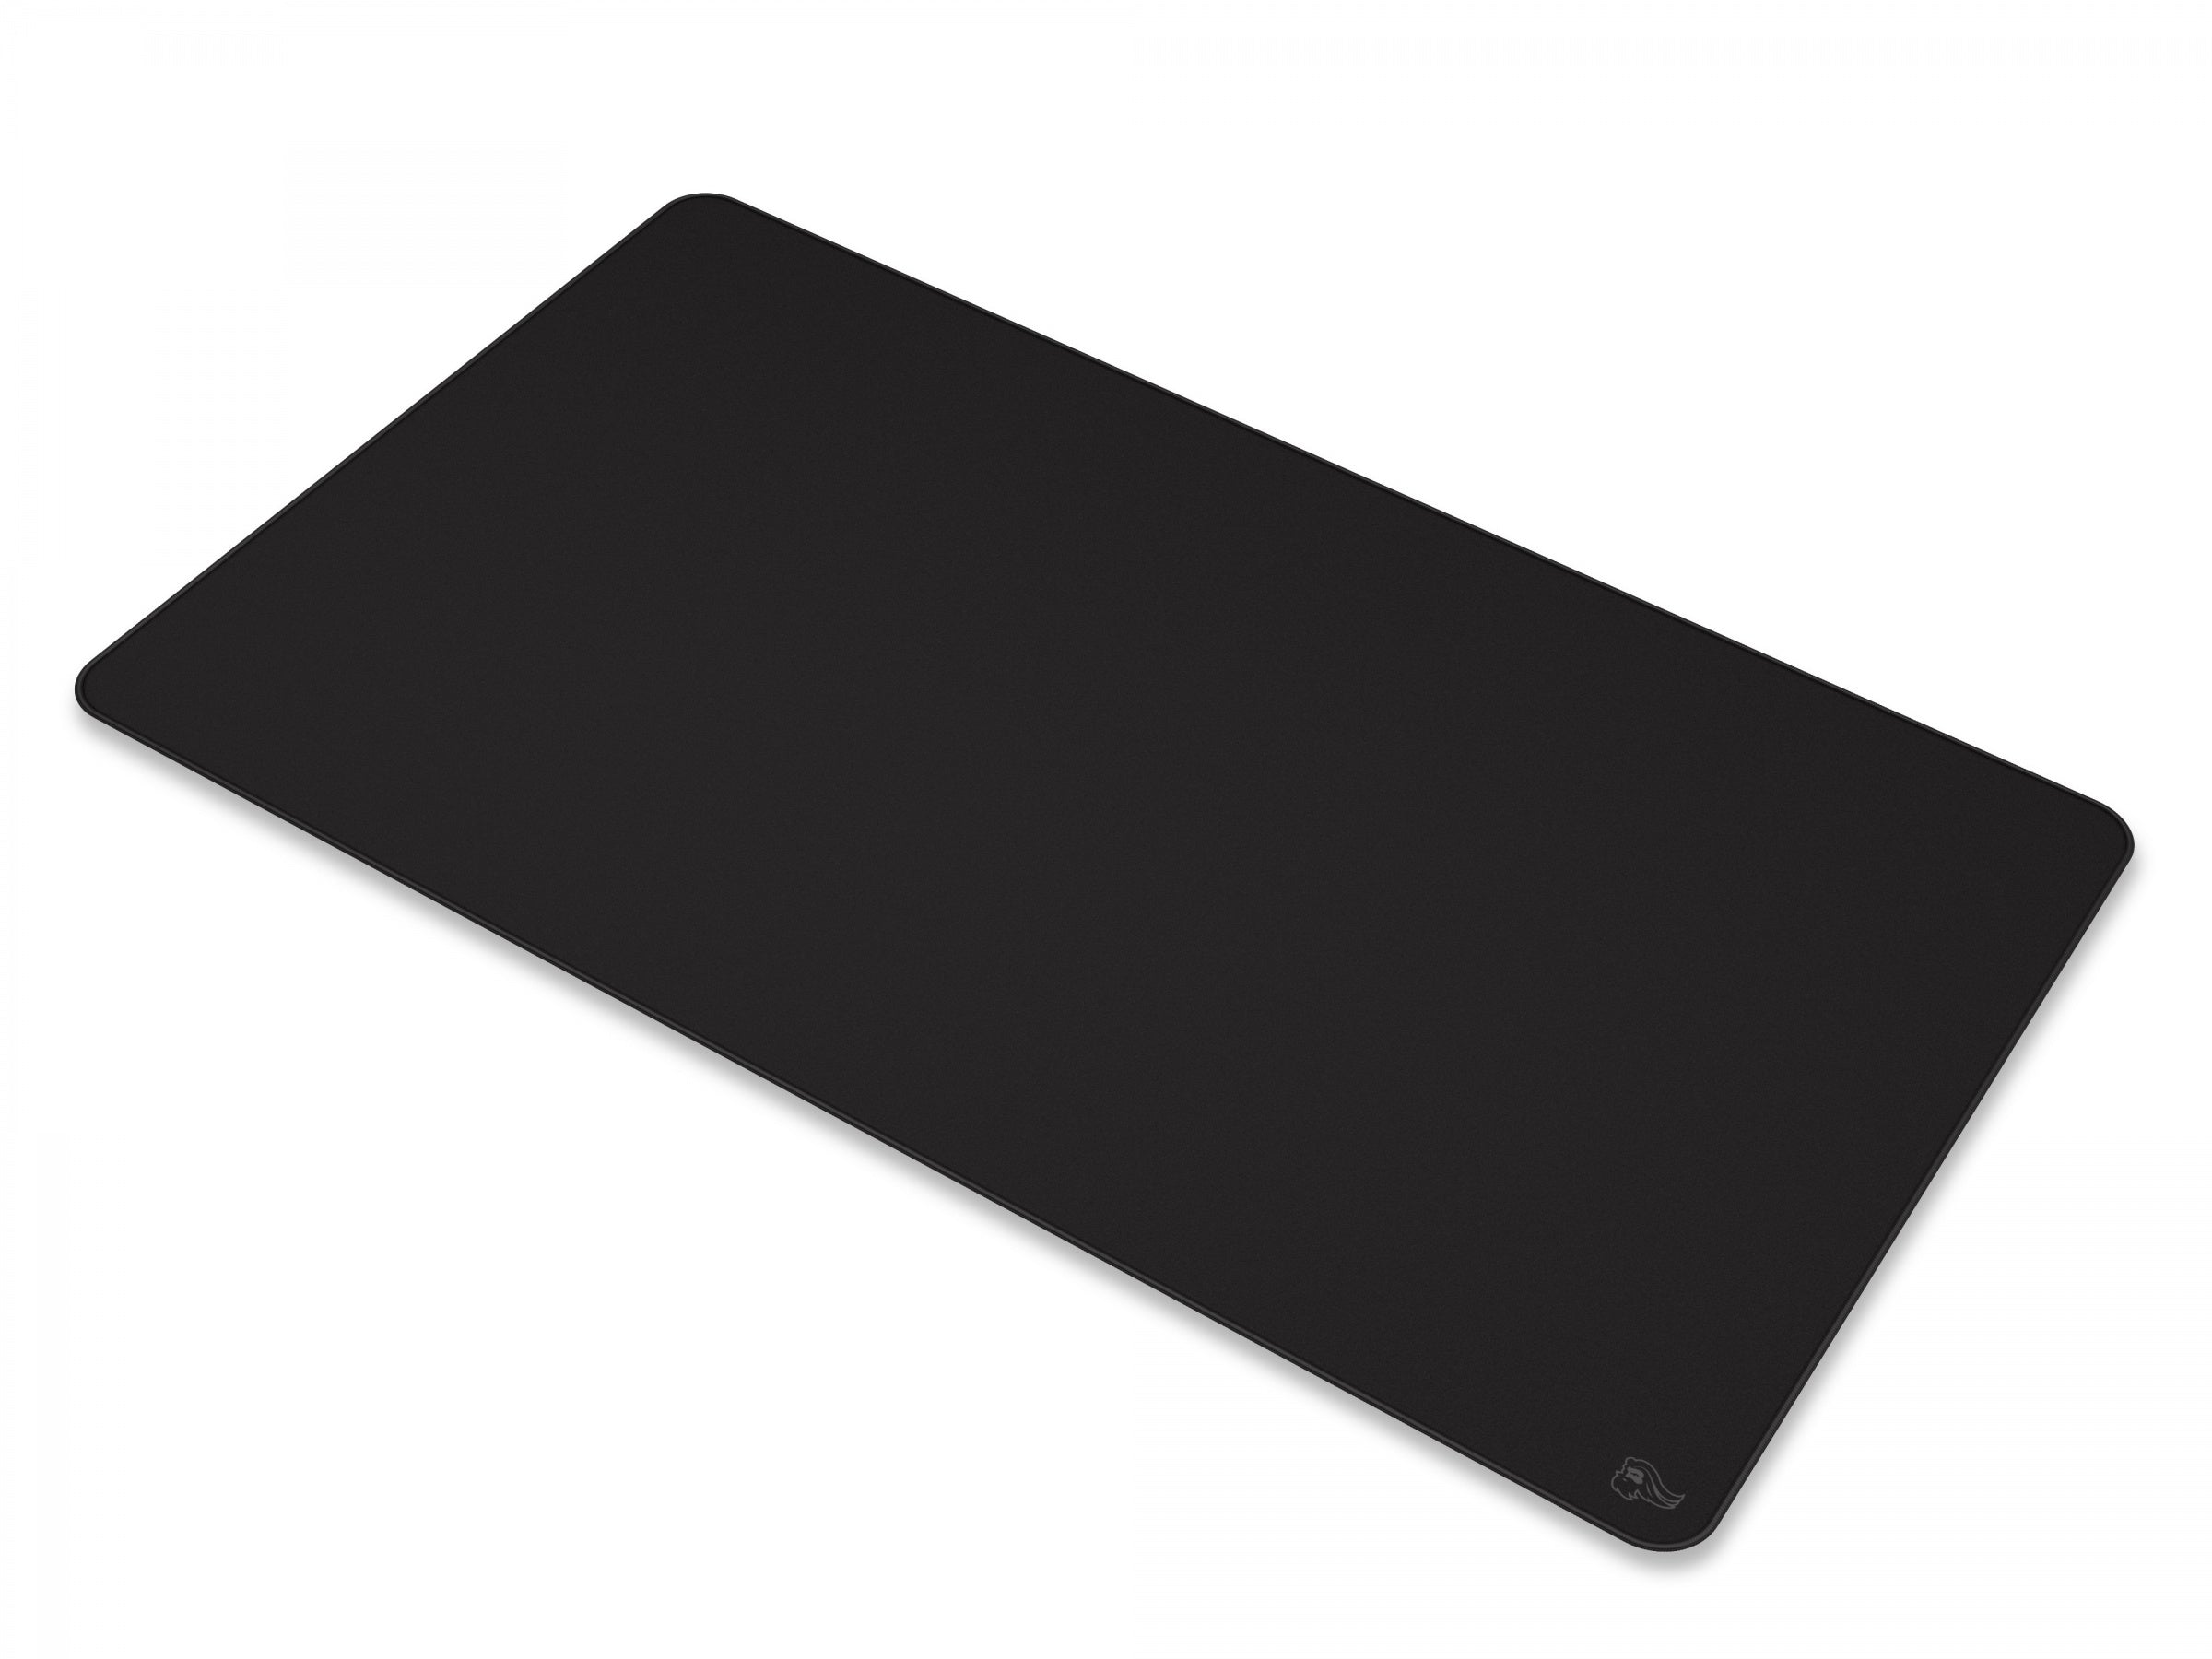 Glorious PC XL Extended Stealth Desk / Mouse Pad MKONN7JCBR |27668|